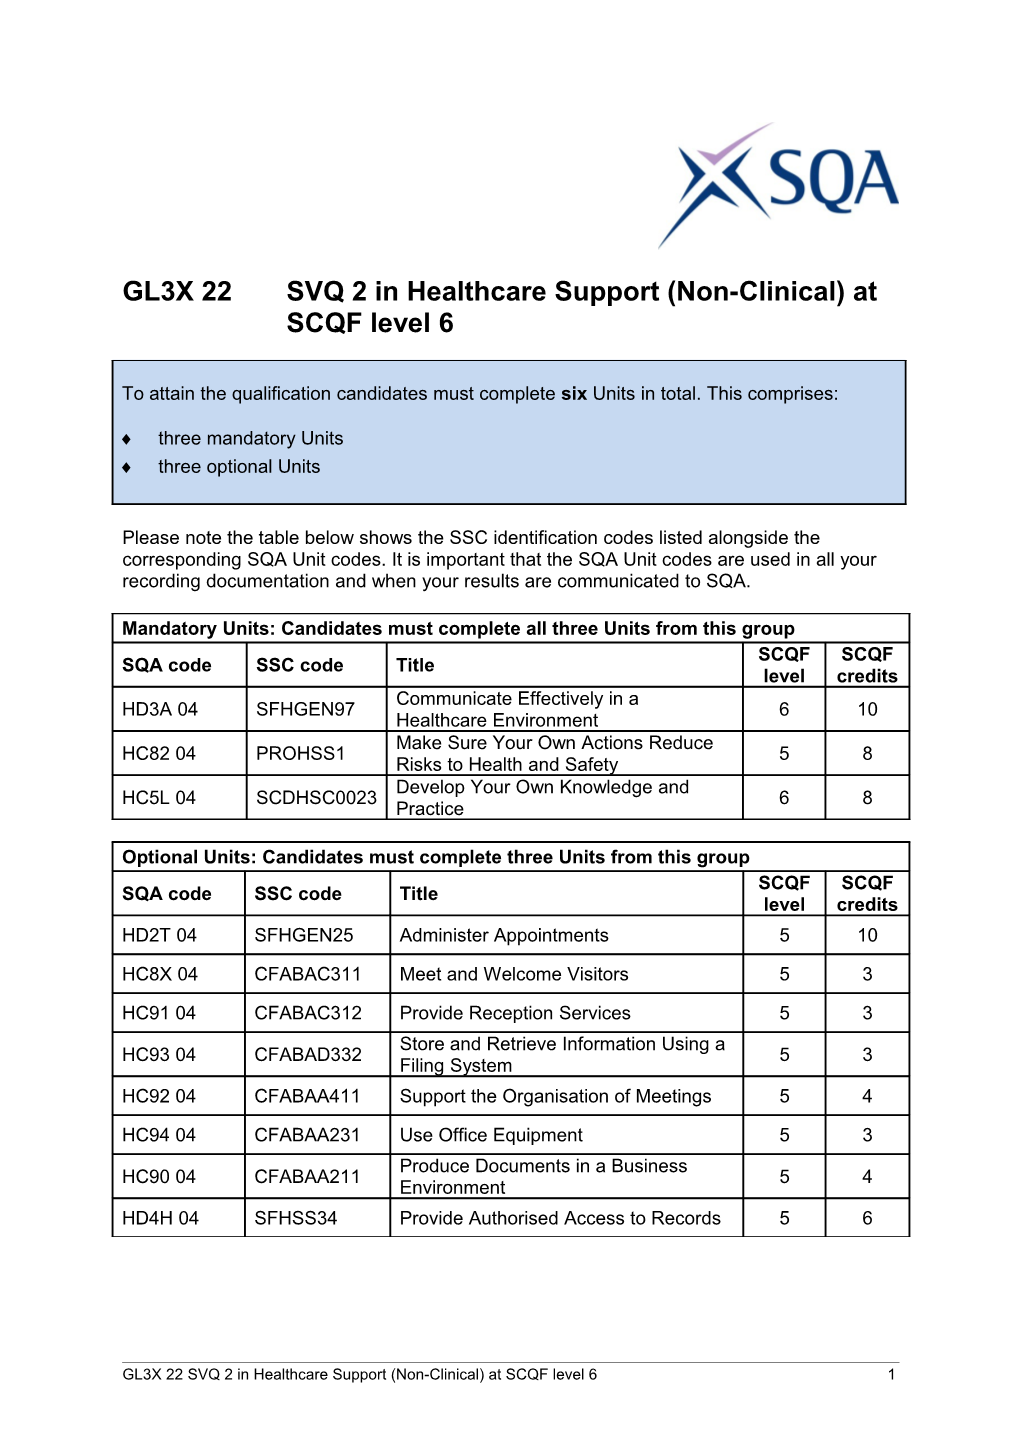 GL3X 22SVQ 2 in Healthcare Support (Non-Clinical) at SCQF Level 61